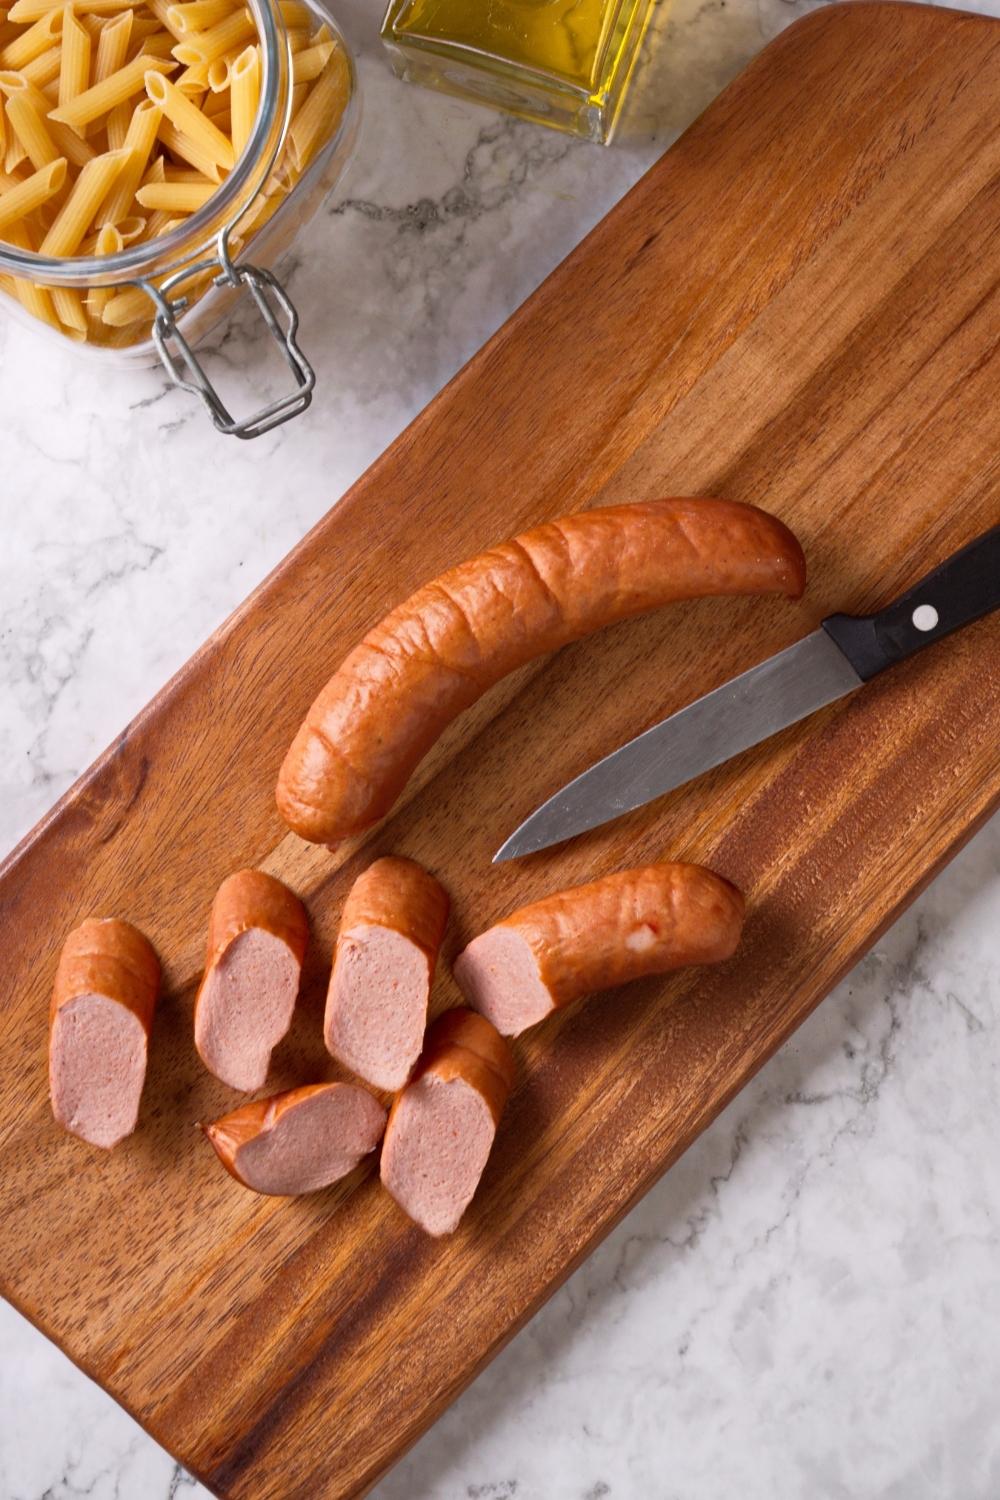 An overhead view of sausage on a cutting board. Half of it is cut into chunks the other half is not. The knife sets next to the sausage.